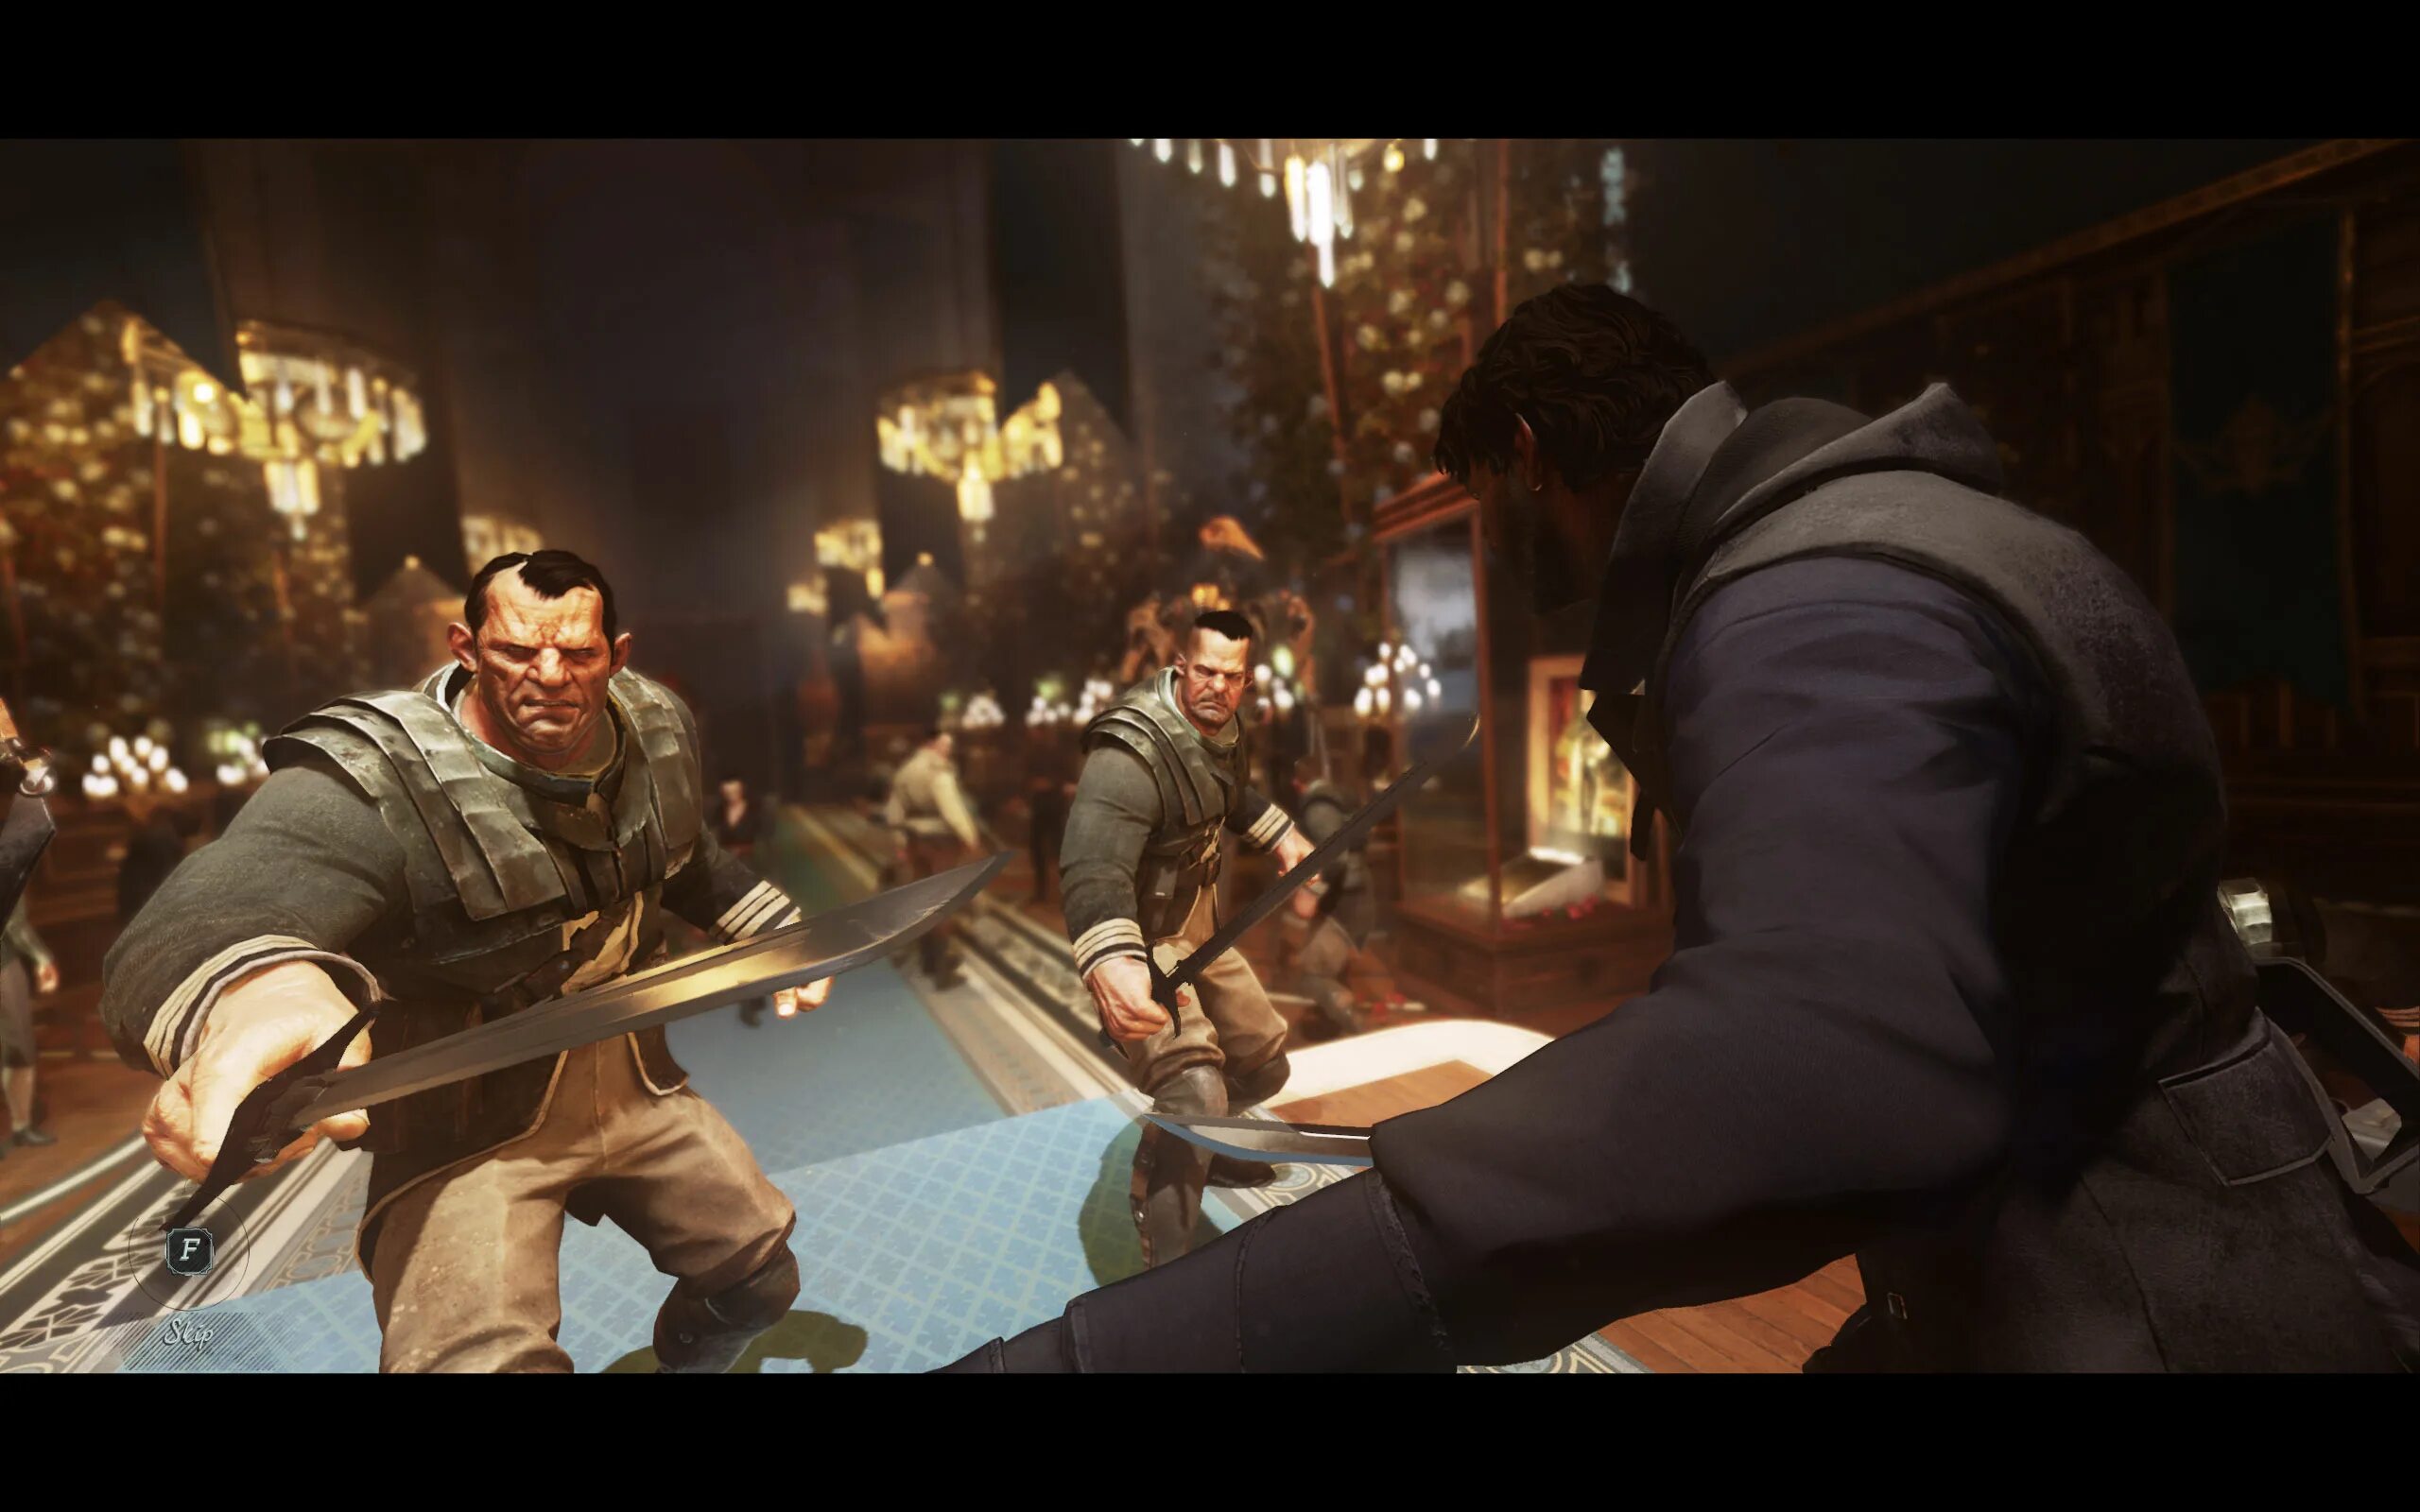 Dishonored 2 Gameplay. Dishonored 2 screenshots. Dishonored 2 Скриншоты. Dishonored 2 геймплей. Dishonored 2 системные